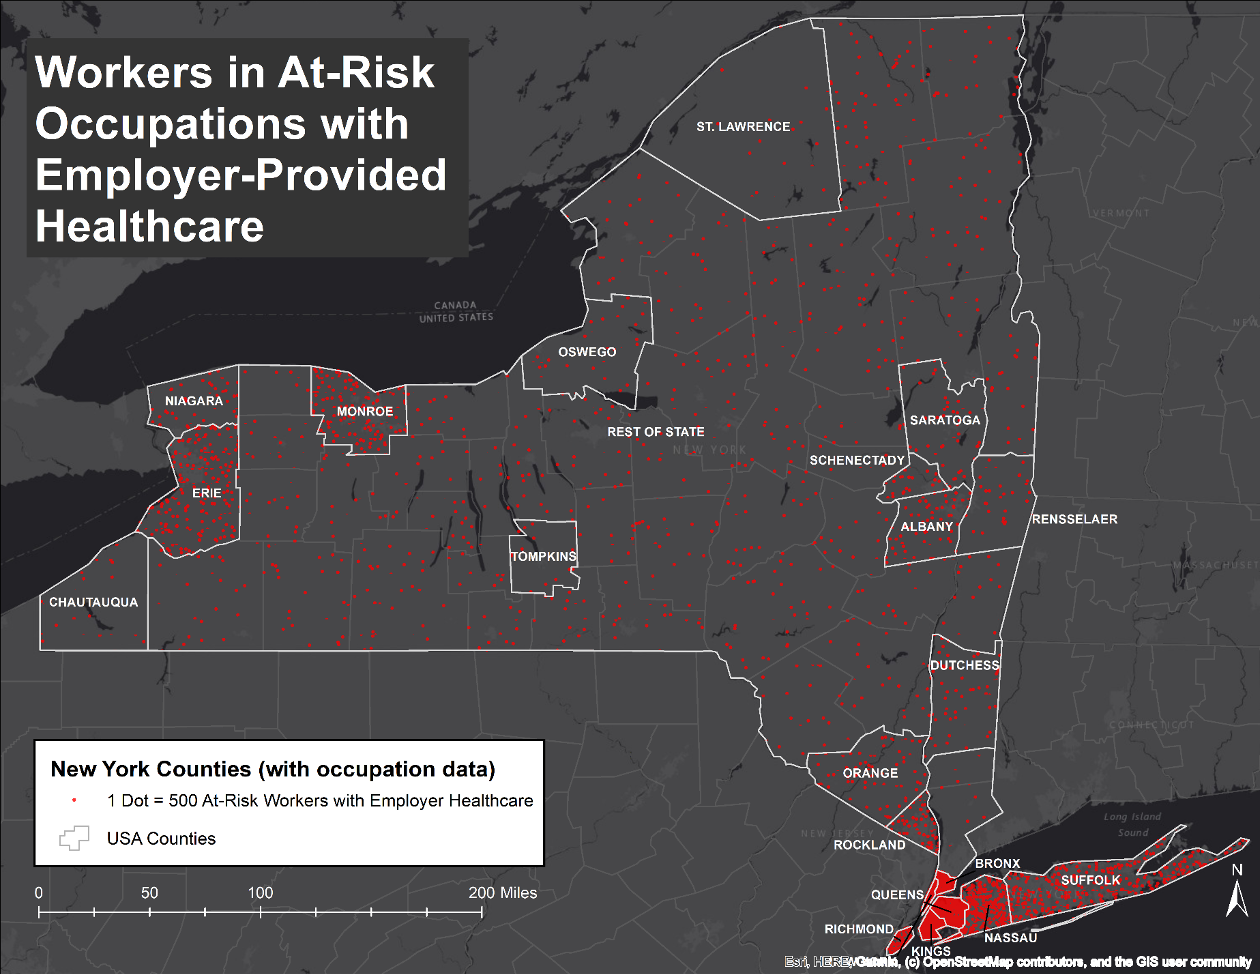 By far, ther are more workers in at risk occupations with employer-provided healthcare in the greater Manhattan area than in upstate locations